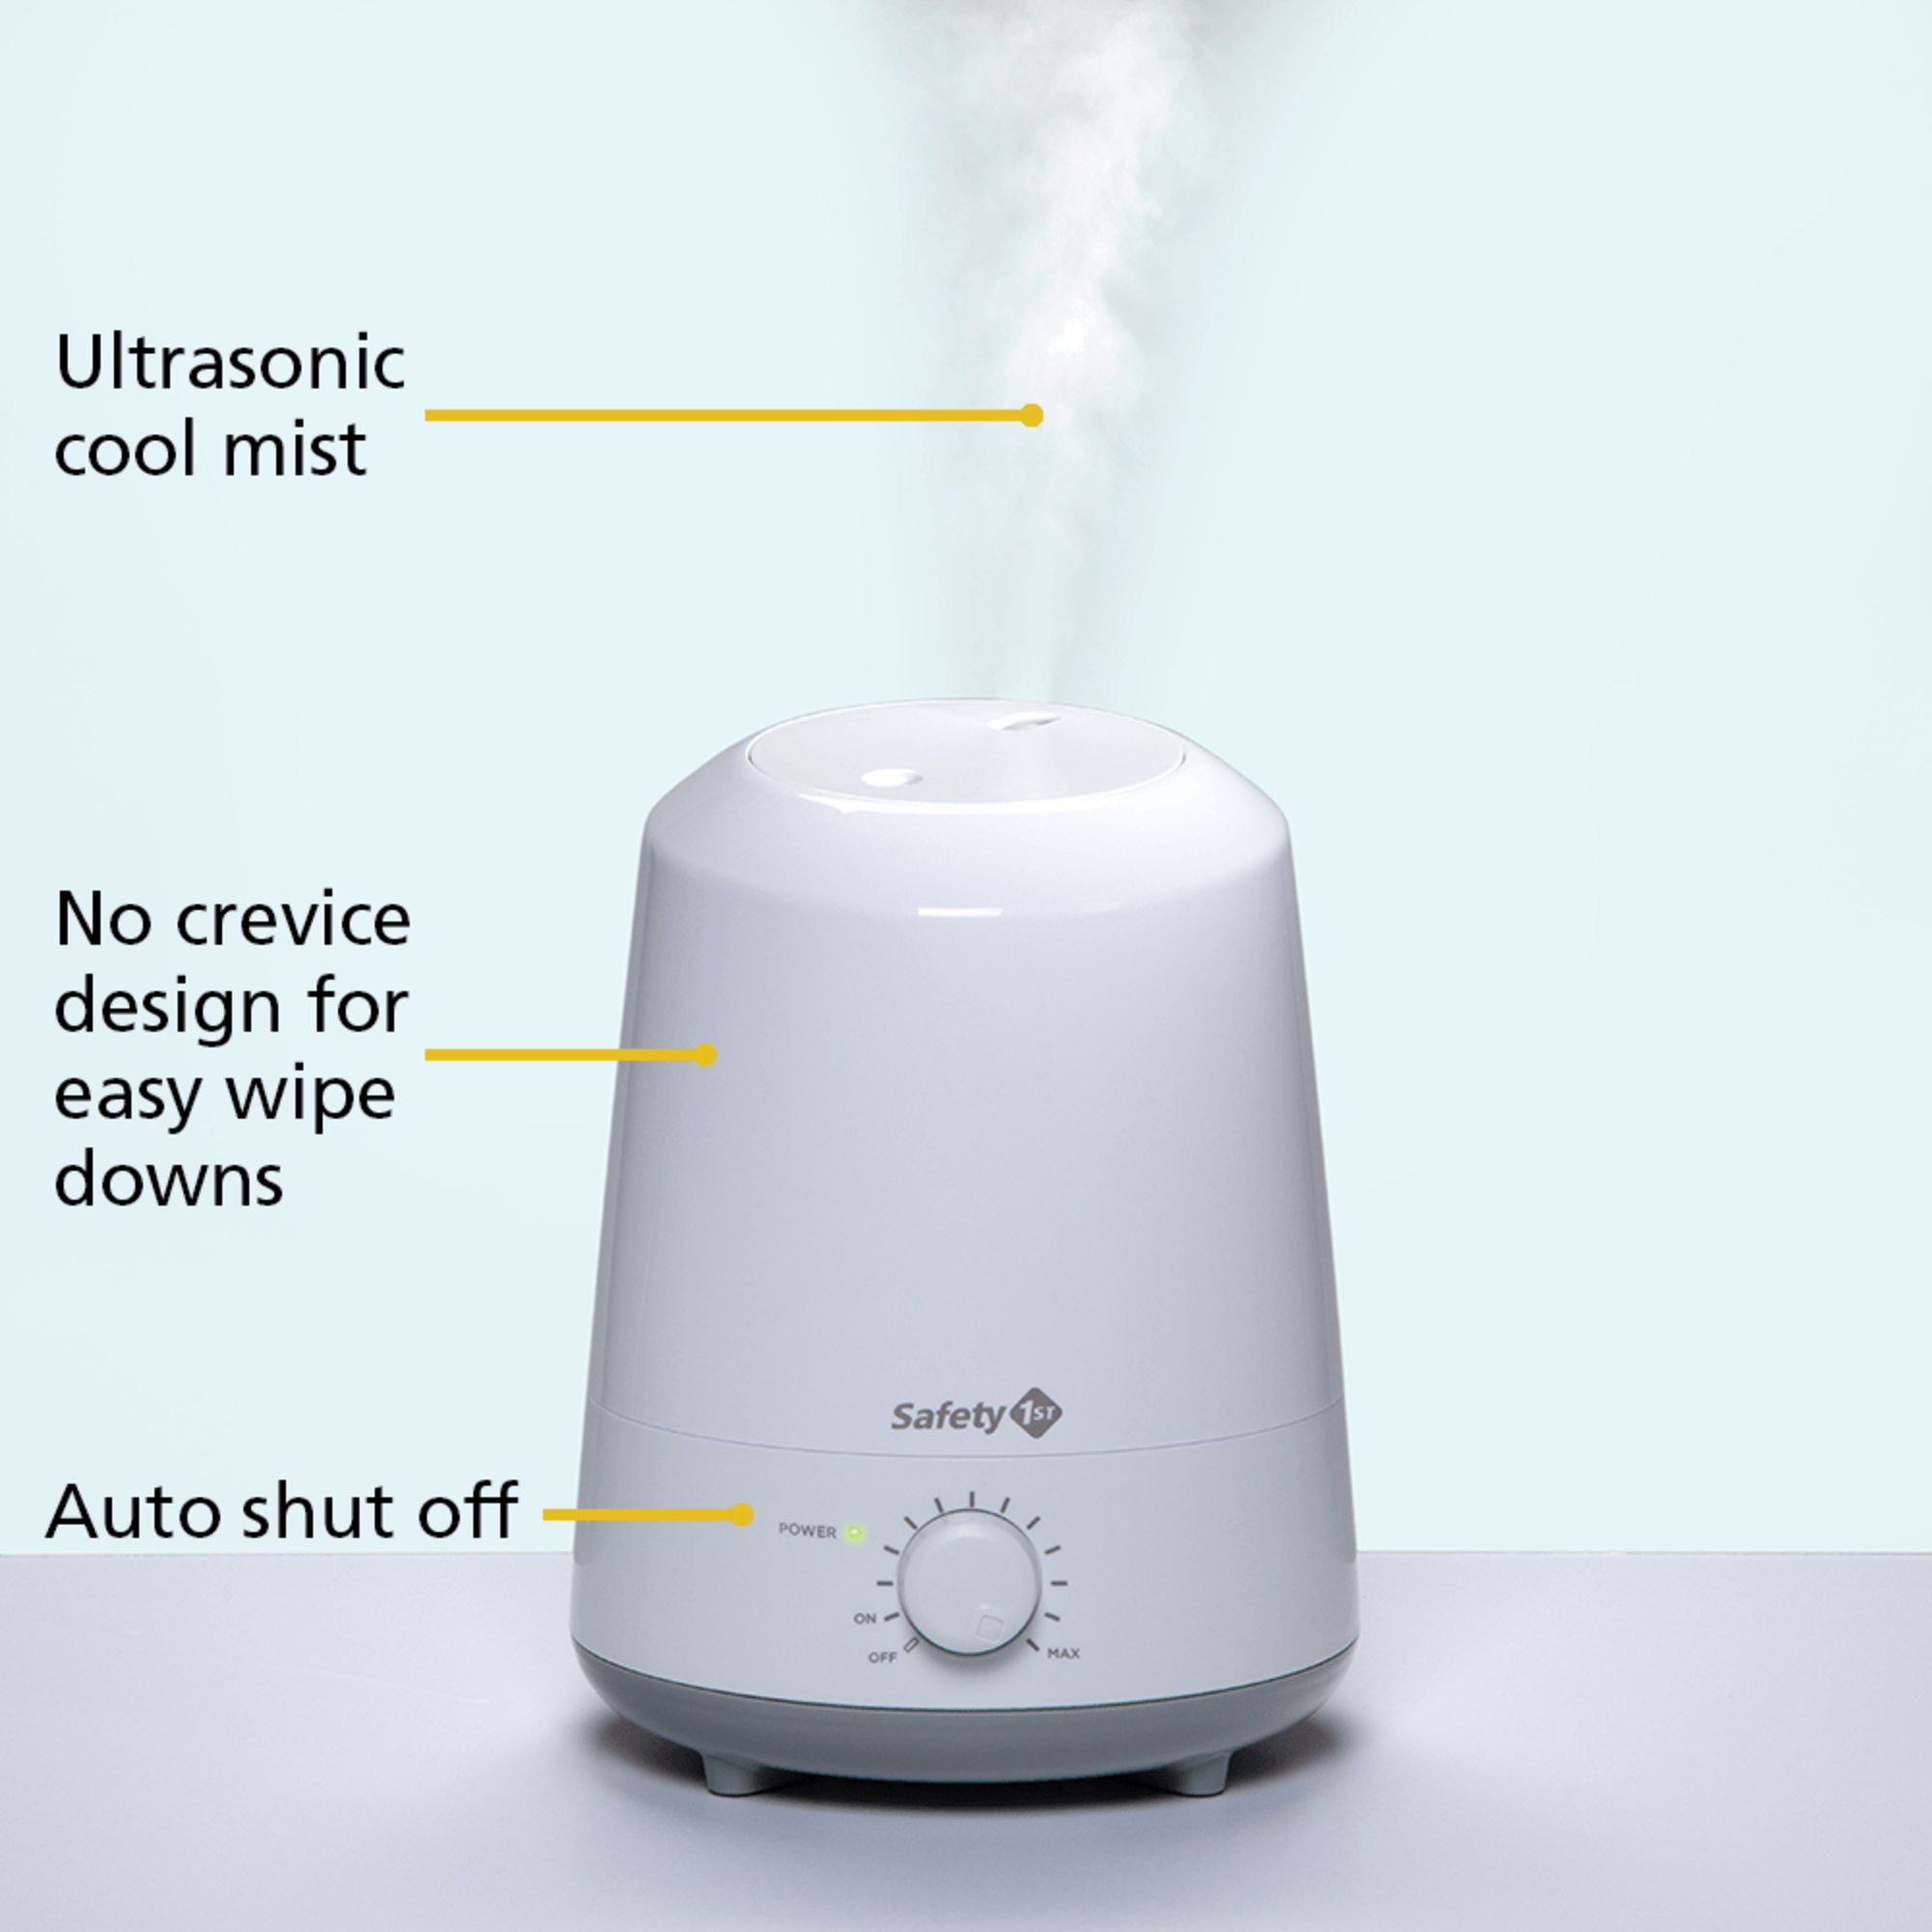 Product in use showing Ultrasonic cool mist, no crevice design for easy wipe downs and auto shut off